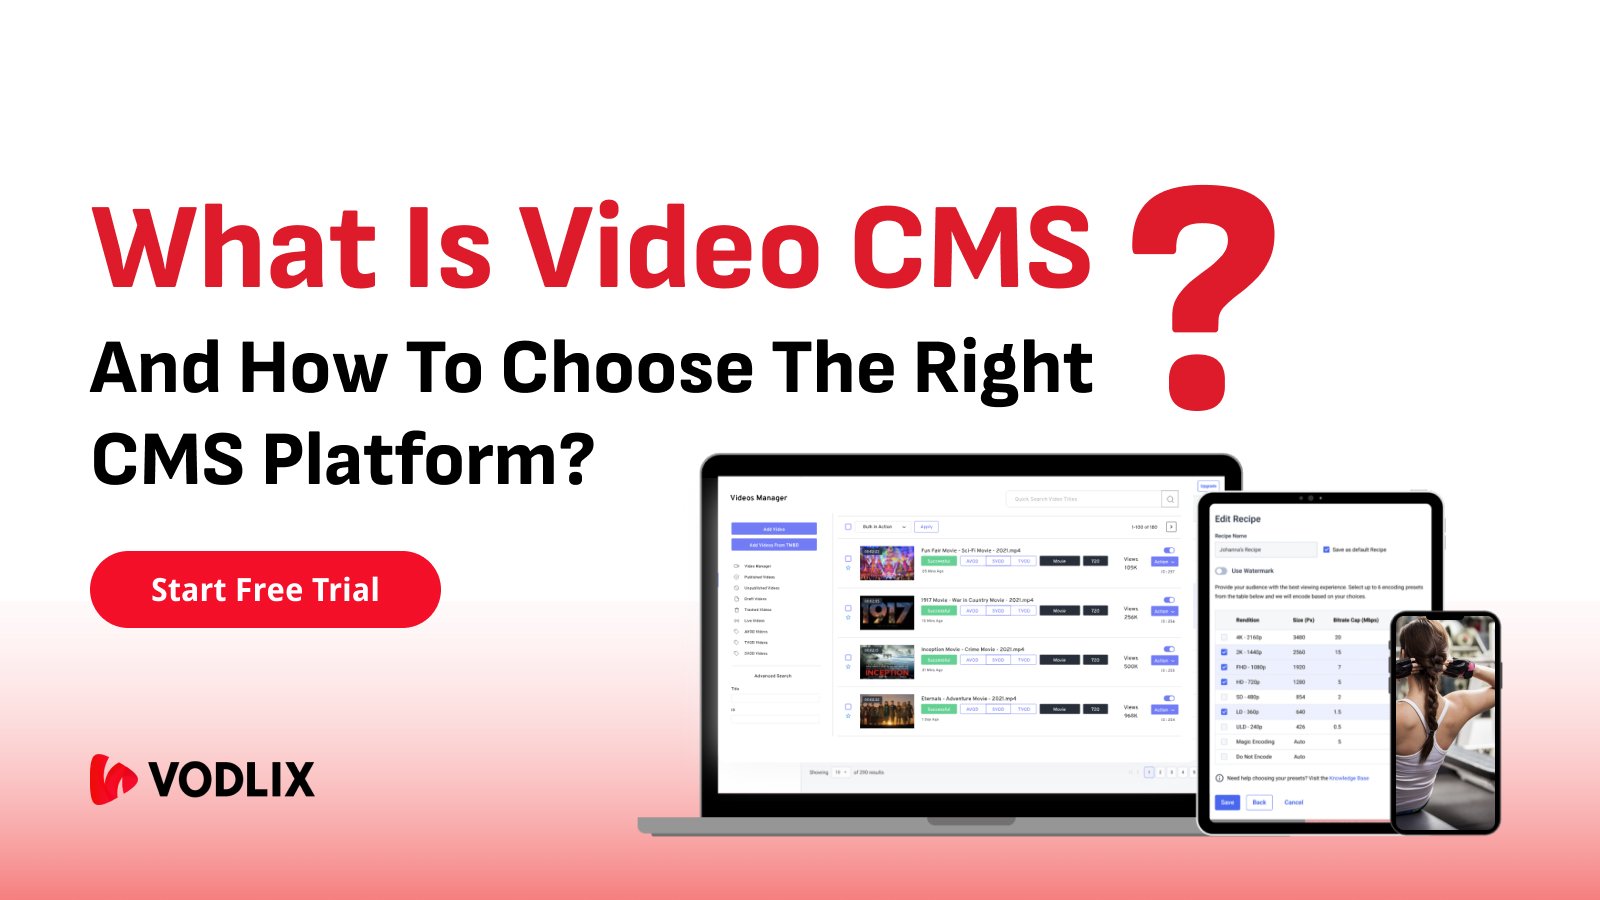 What is Video CMS and How to Choose the Right CMS Platform?